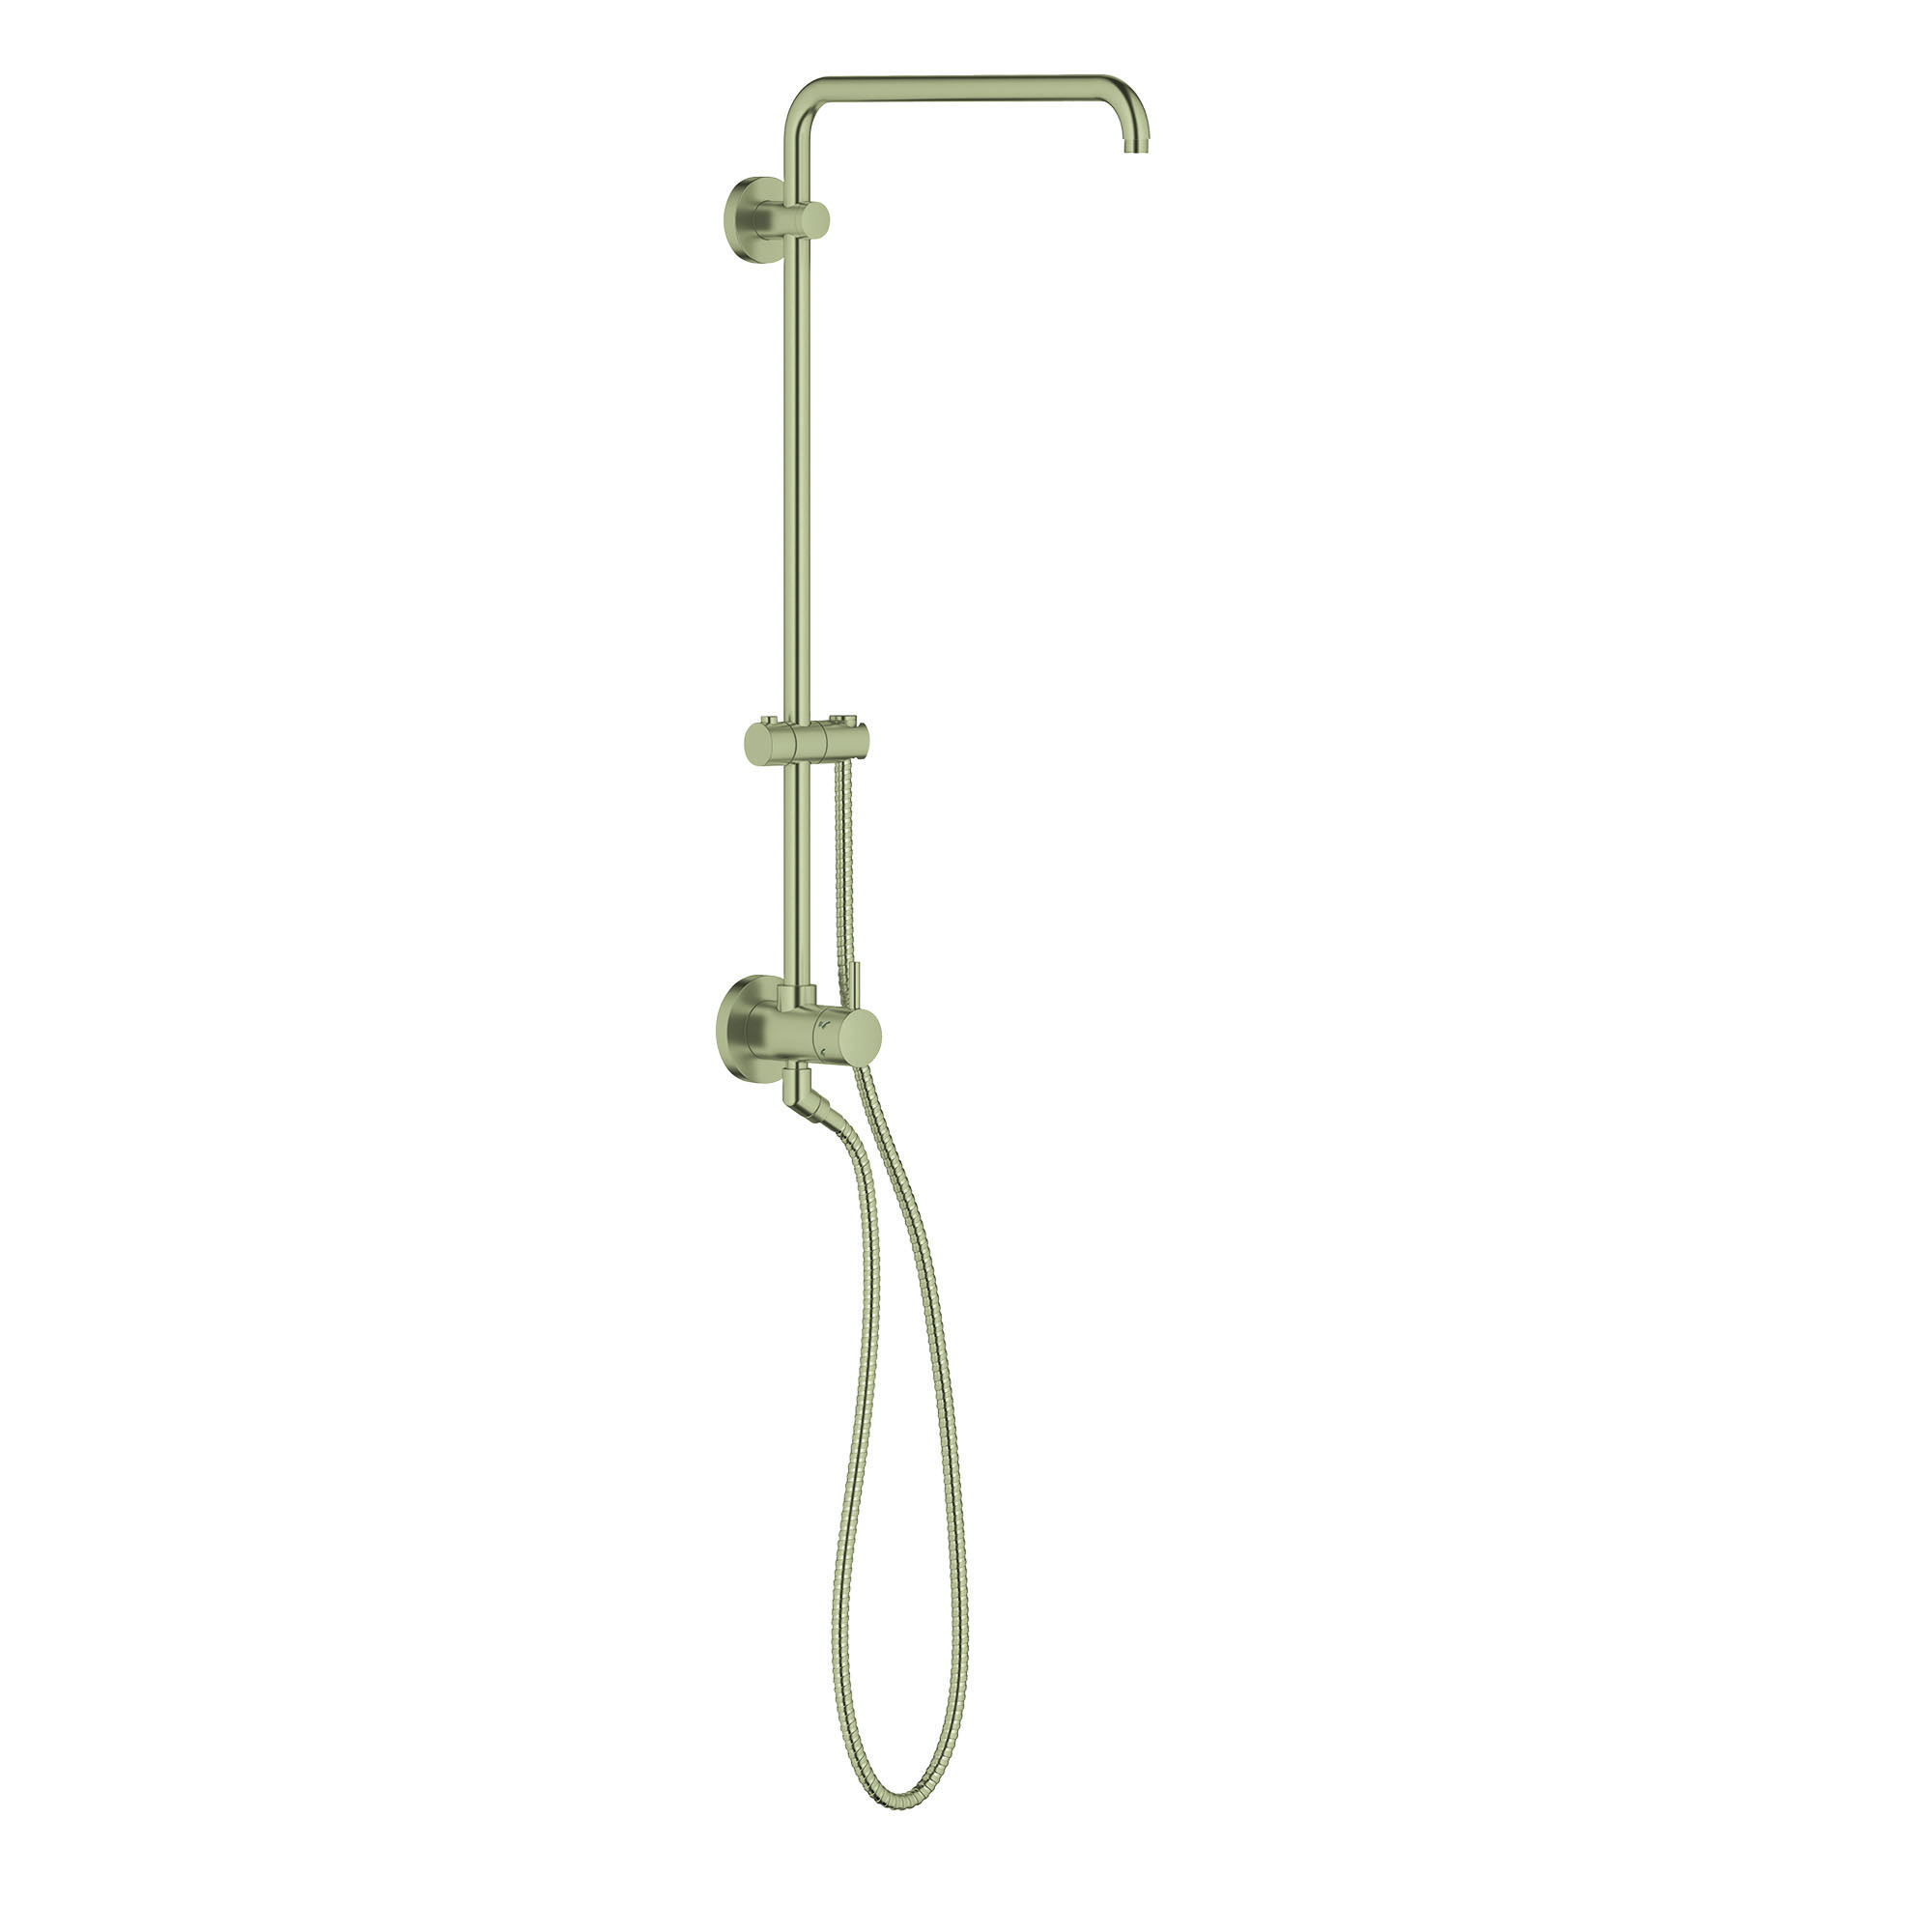 25" Shower System with Rainshower Shower Arm